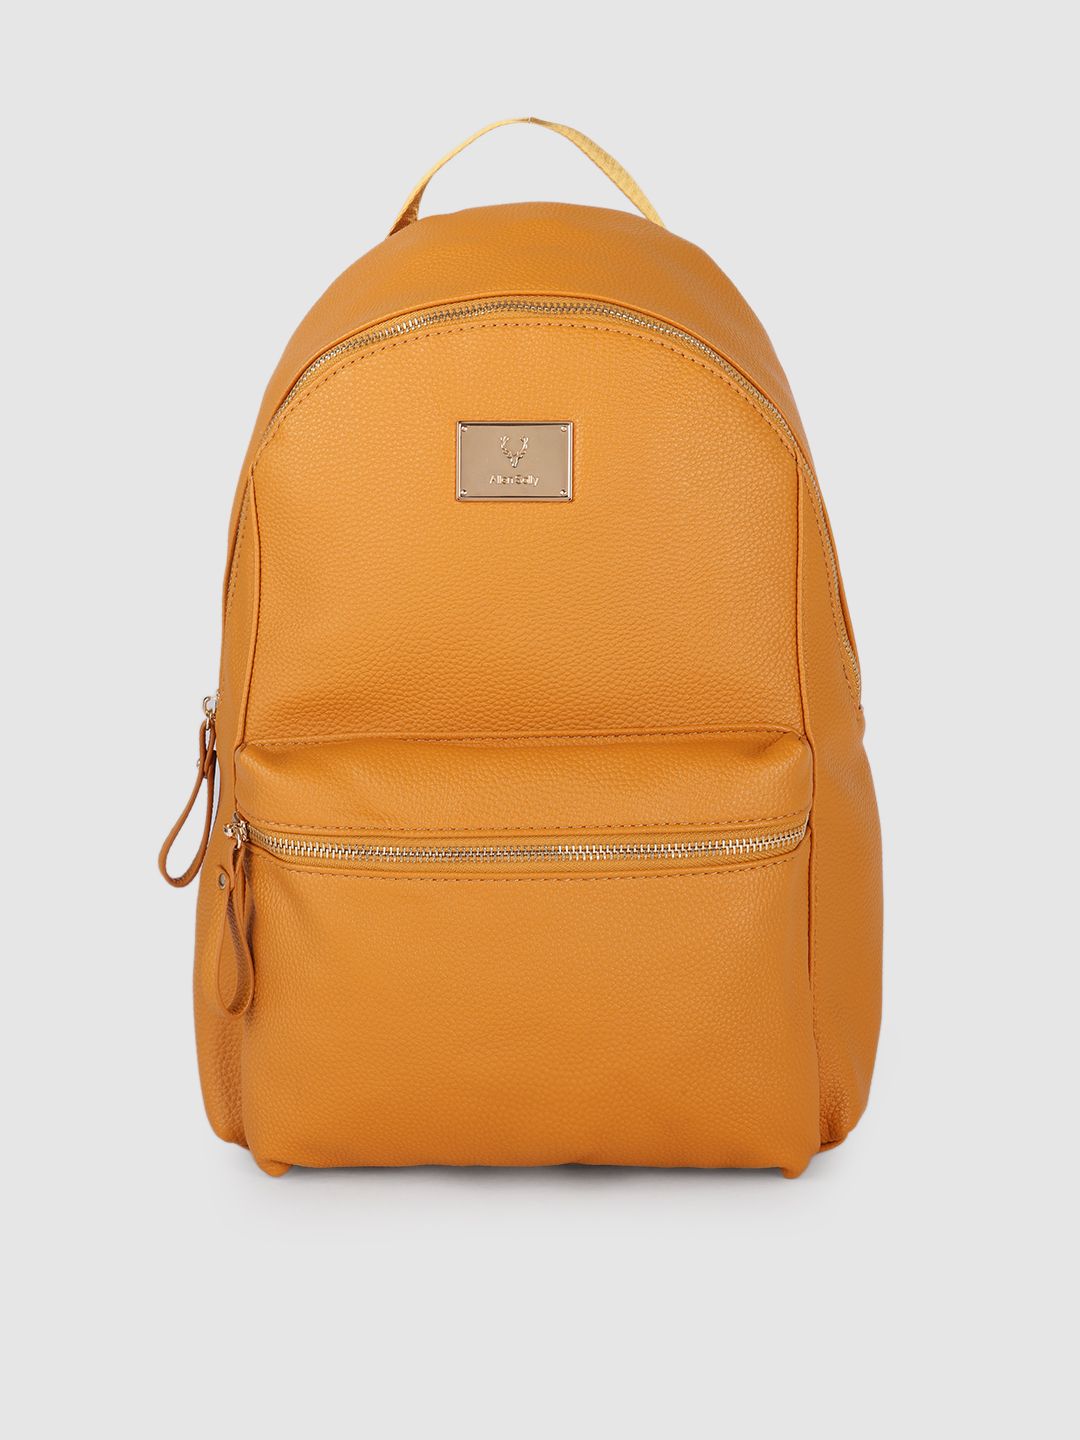 Allen Solly Women Mustard Yellow Solid Backpack Price in India